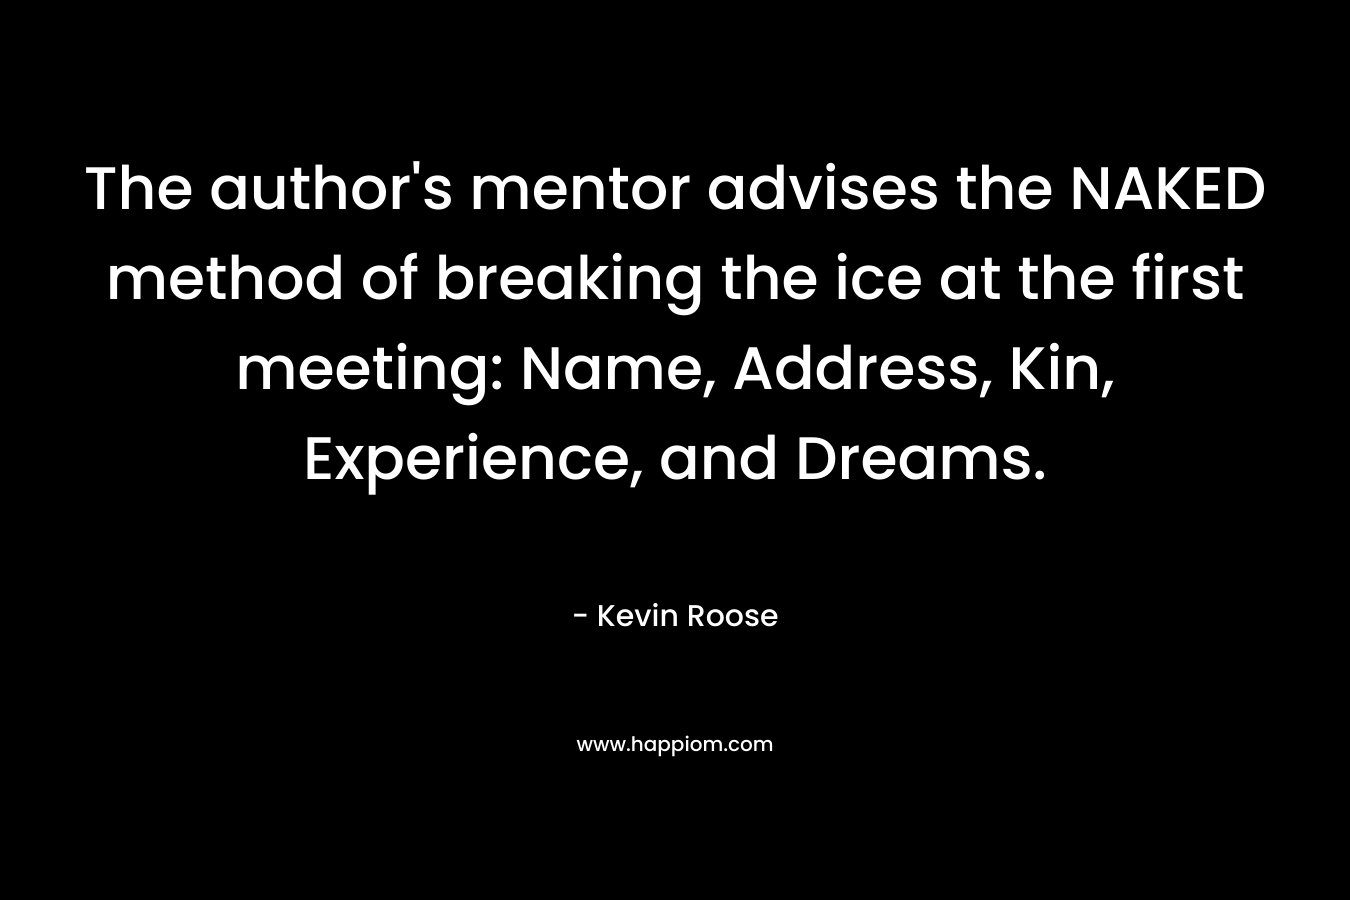 The author’s mentor advises the NAKED method of breaking the ice at the first meeting: Name, Address, Kin, Experience, and Dreams. – Kevin Roose